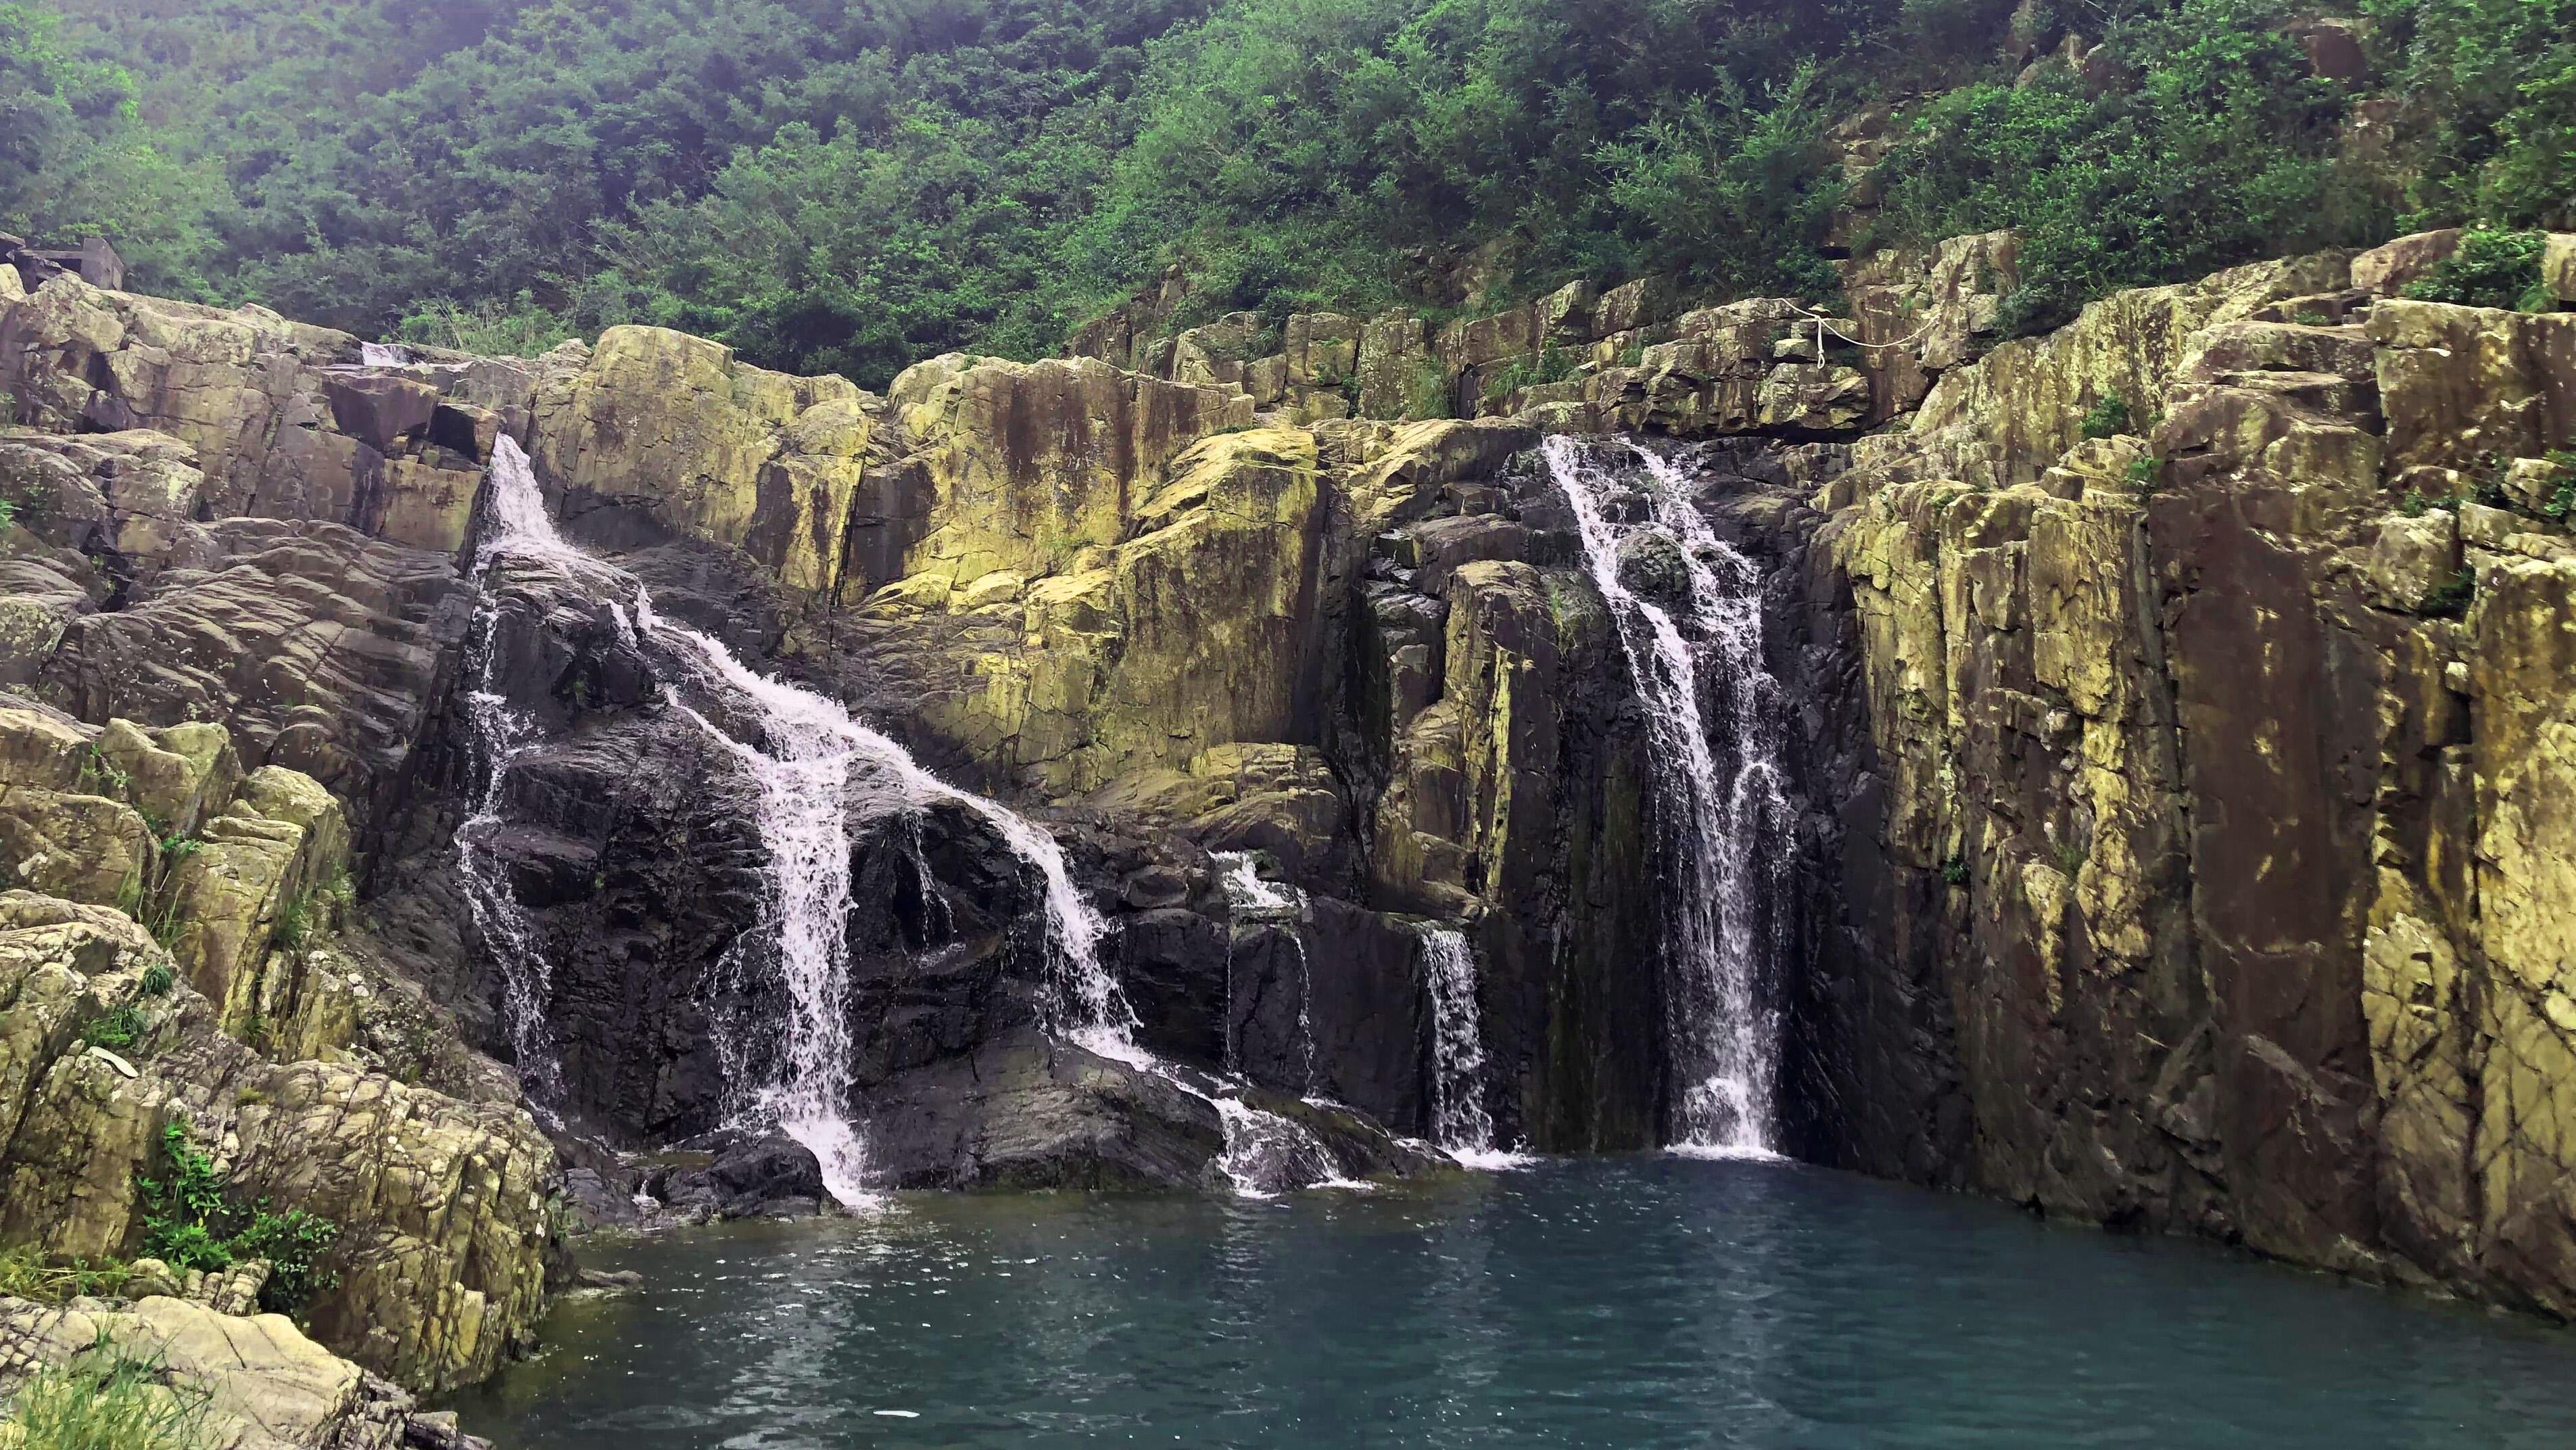 One of the four natural rock pools in Sai Wan